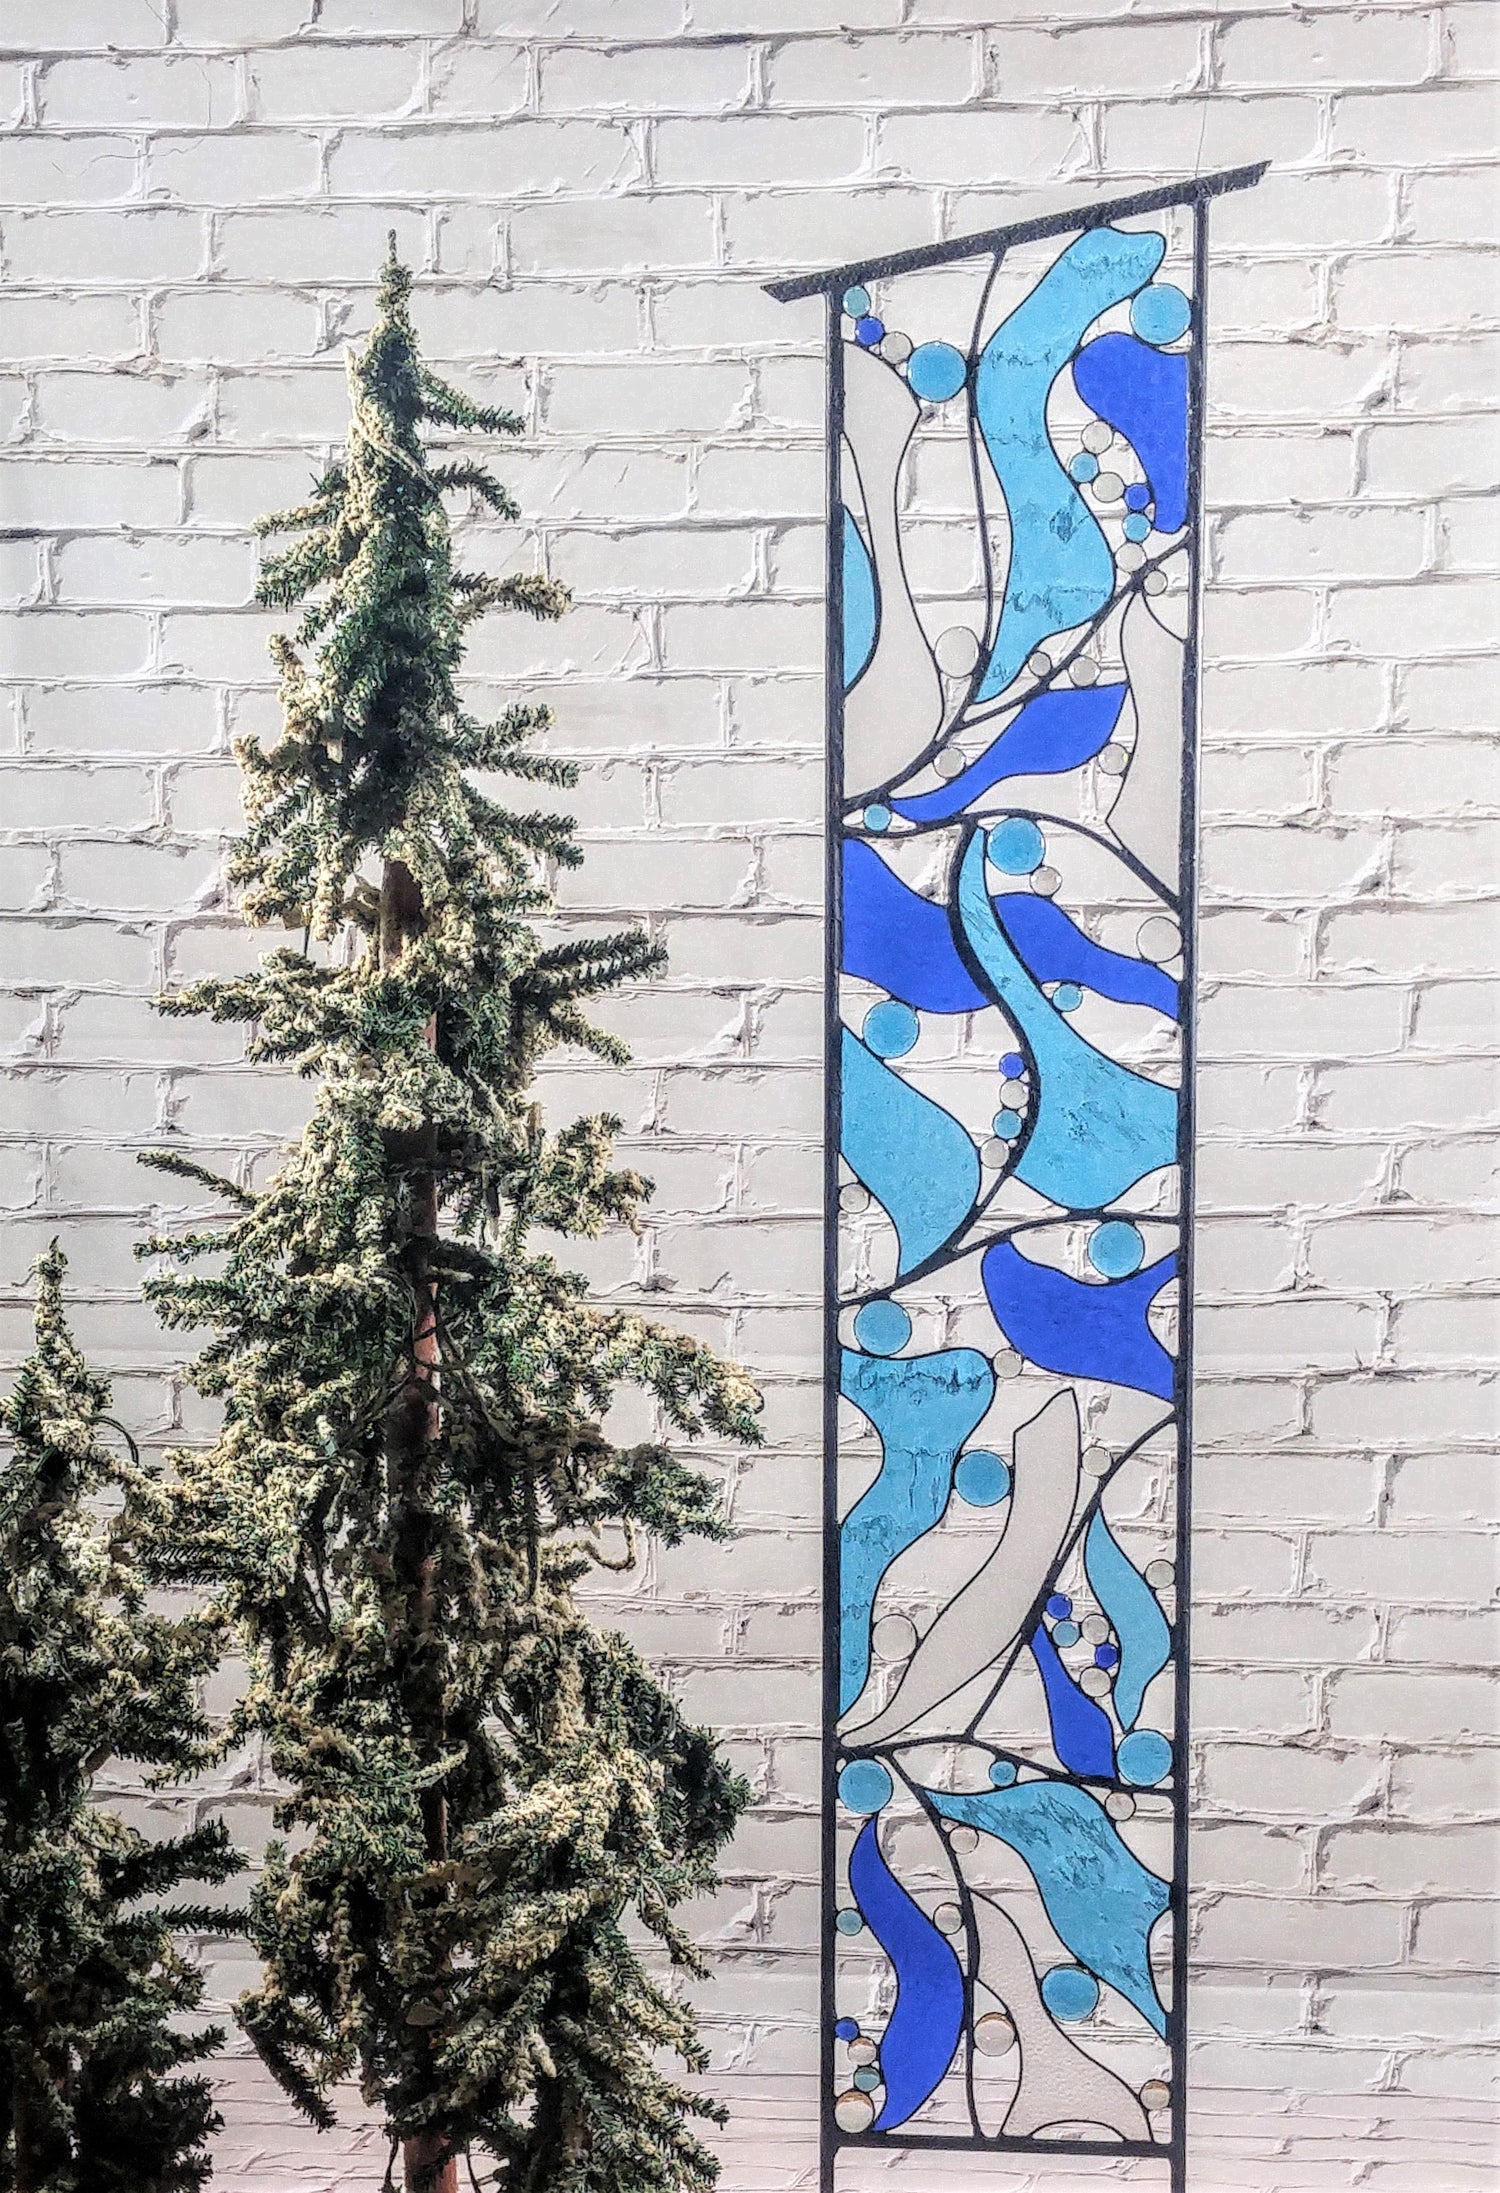 Contemporary Stained Glass Art for Outdoor Garden Decor - &